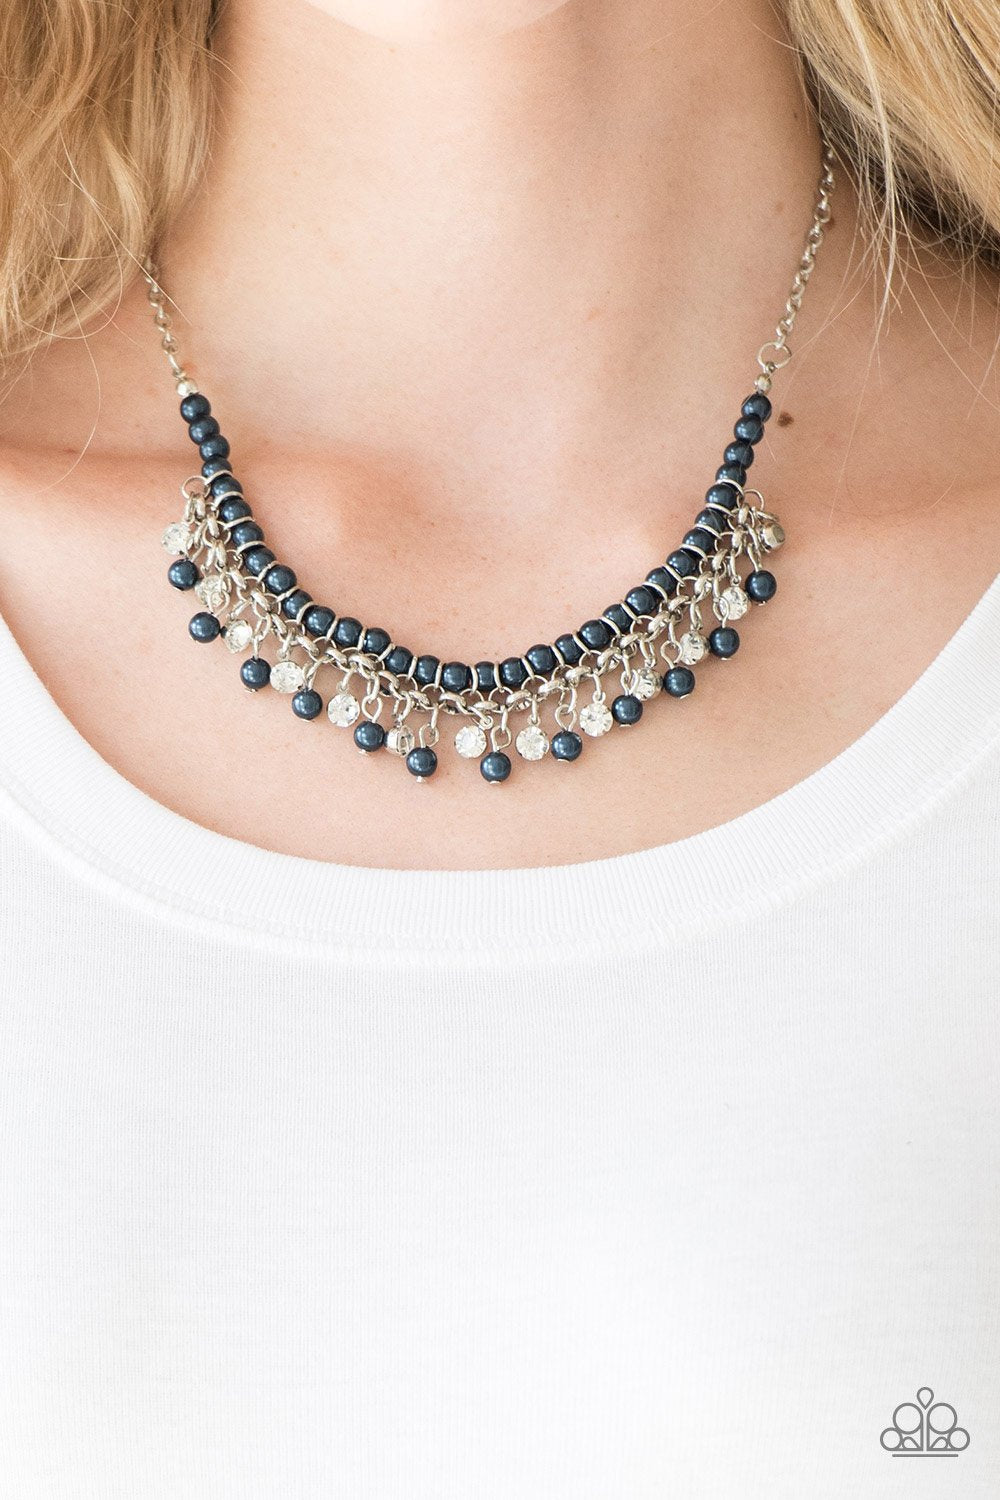 A Touch of Classy Blue Necklace